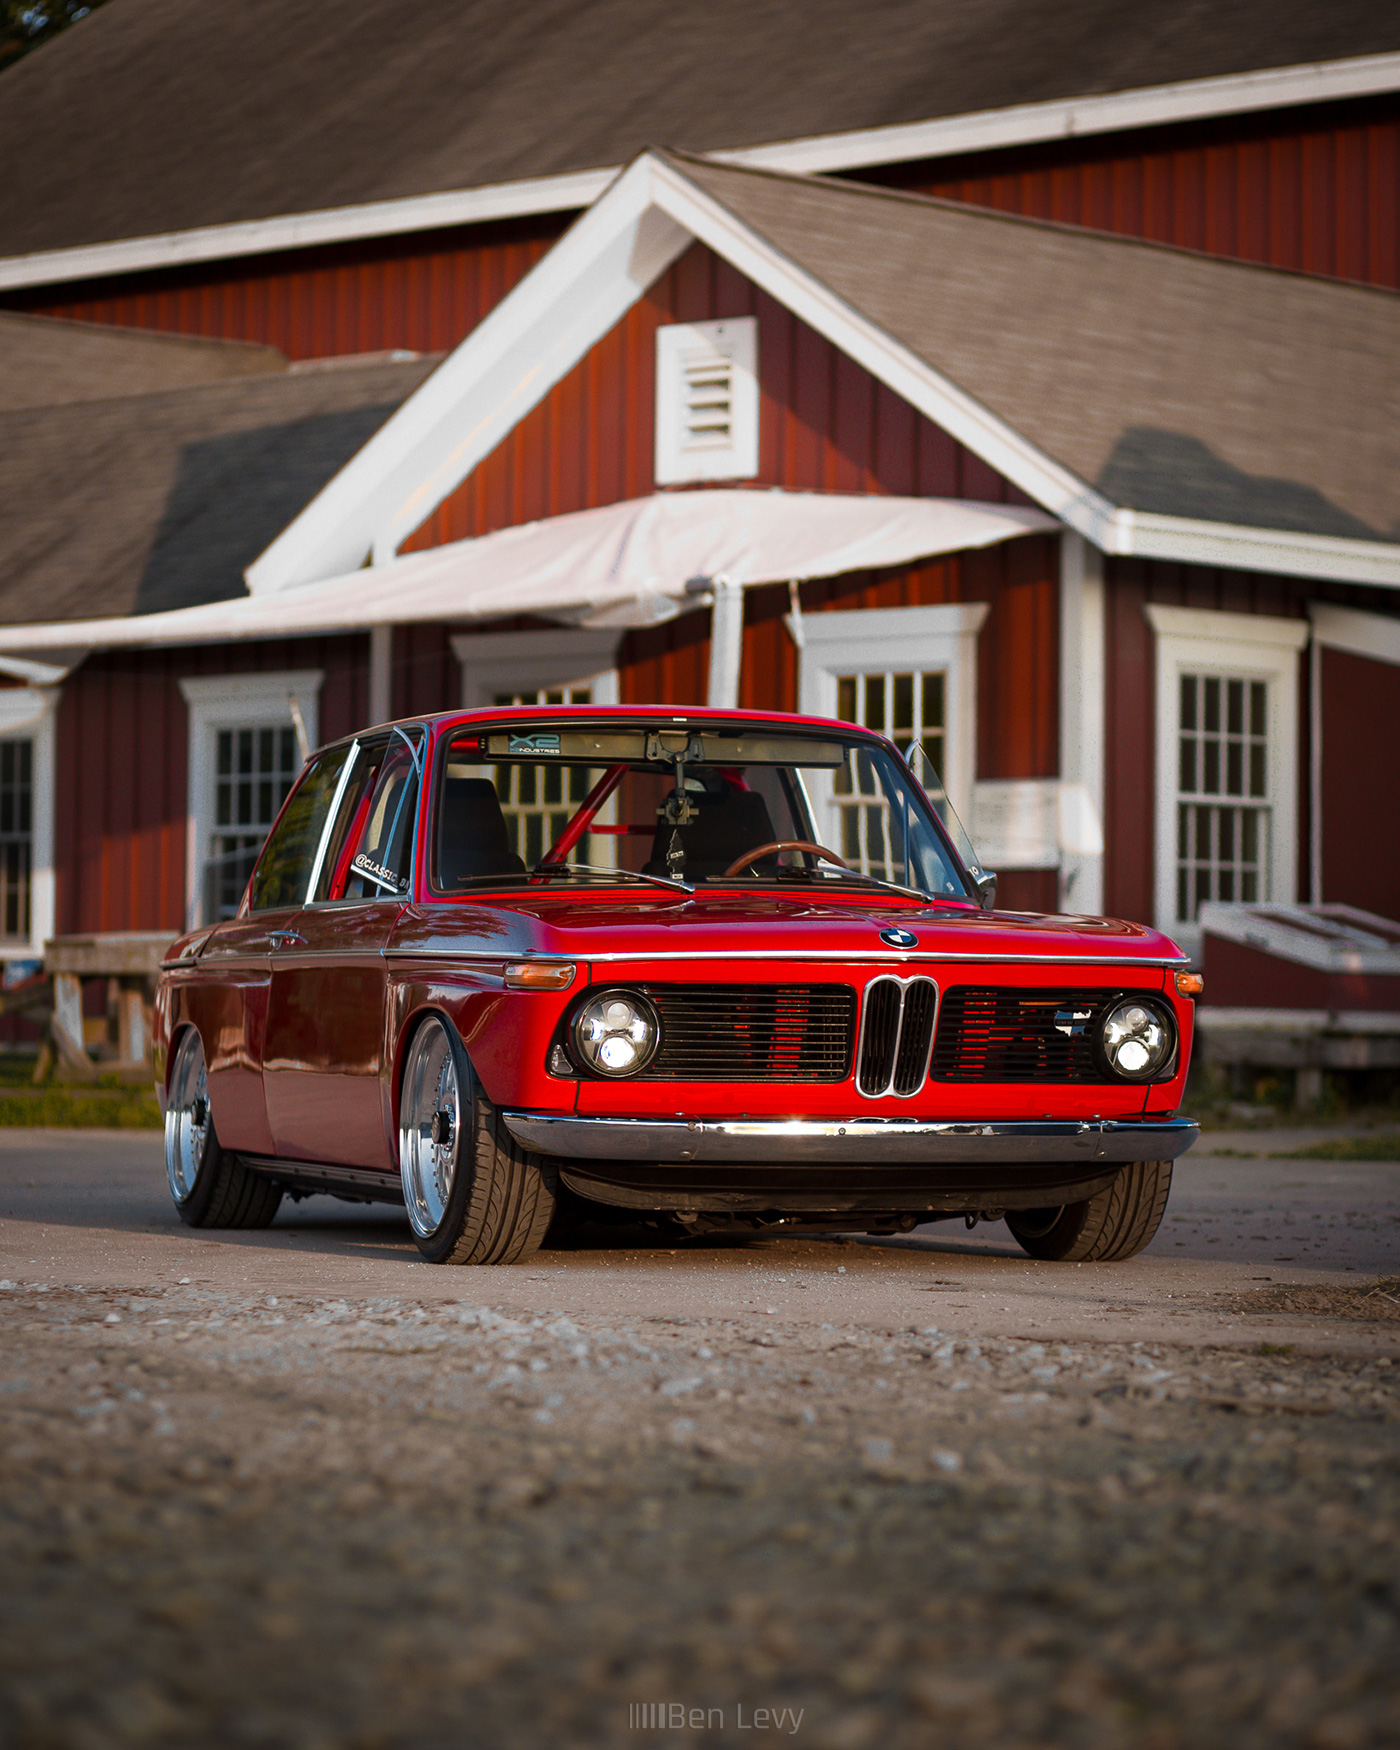 Bagged Red BMW E10 2002 at Photoshoot